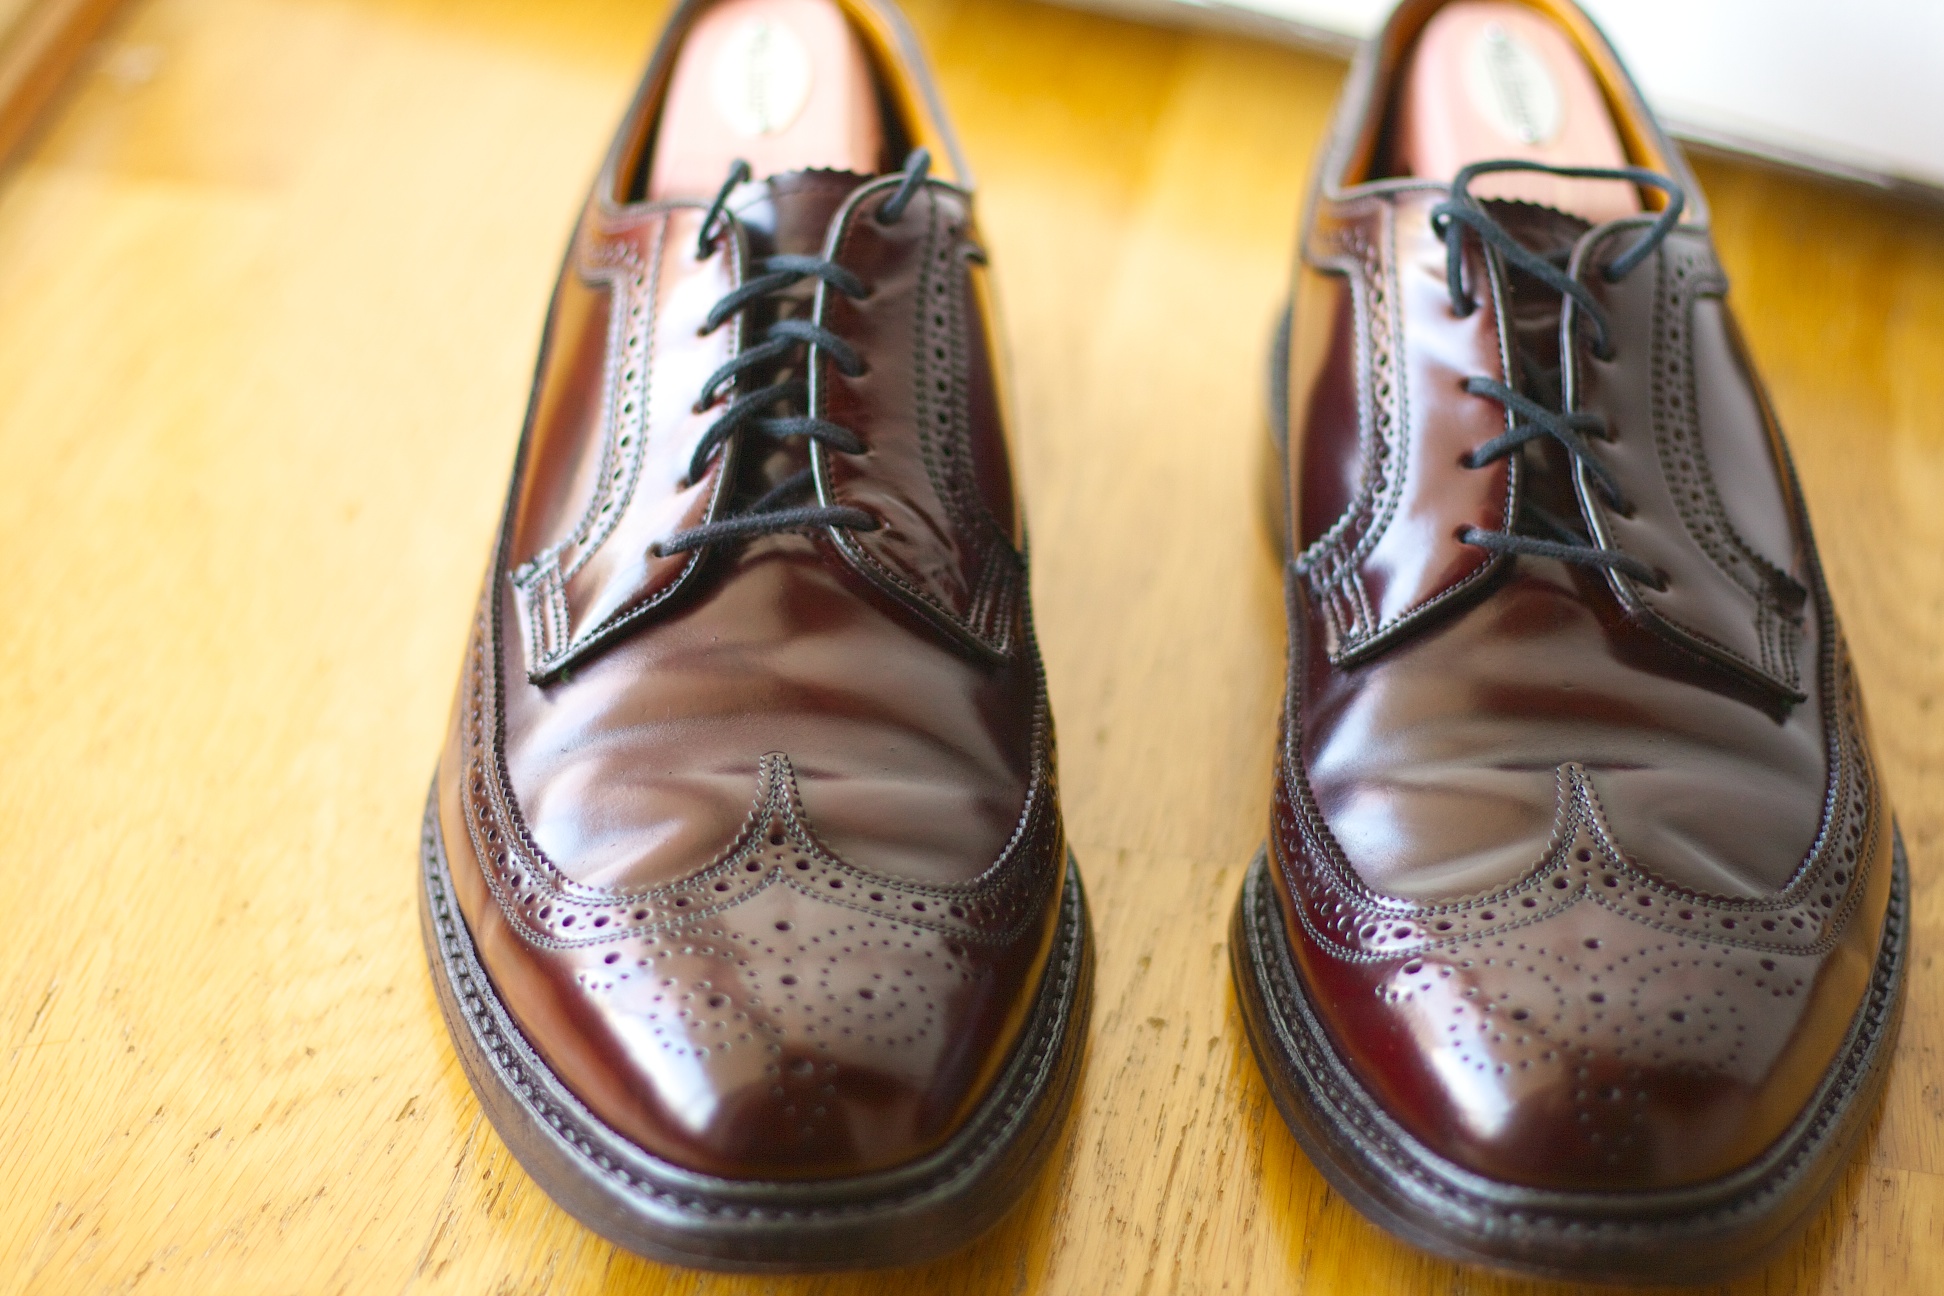 Help me date these shell cordovan Florsheim Imperial longwings